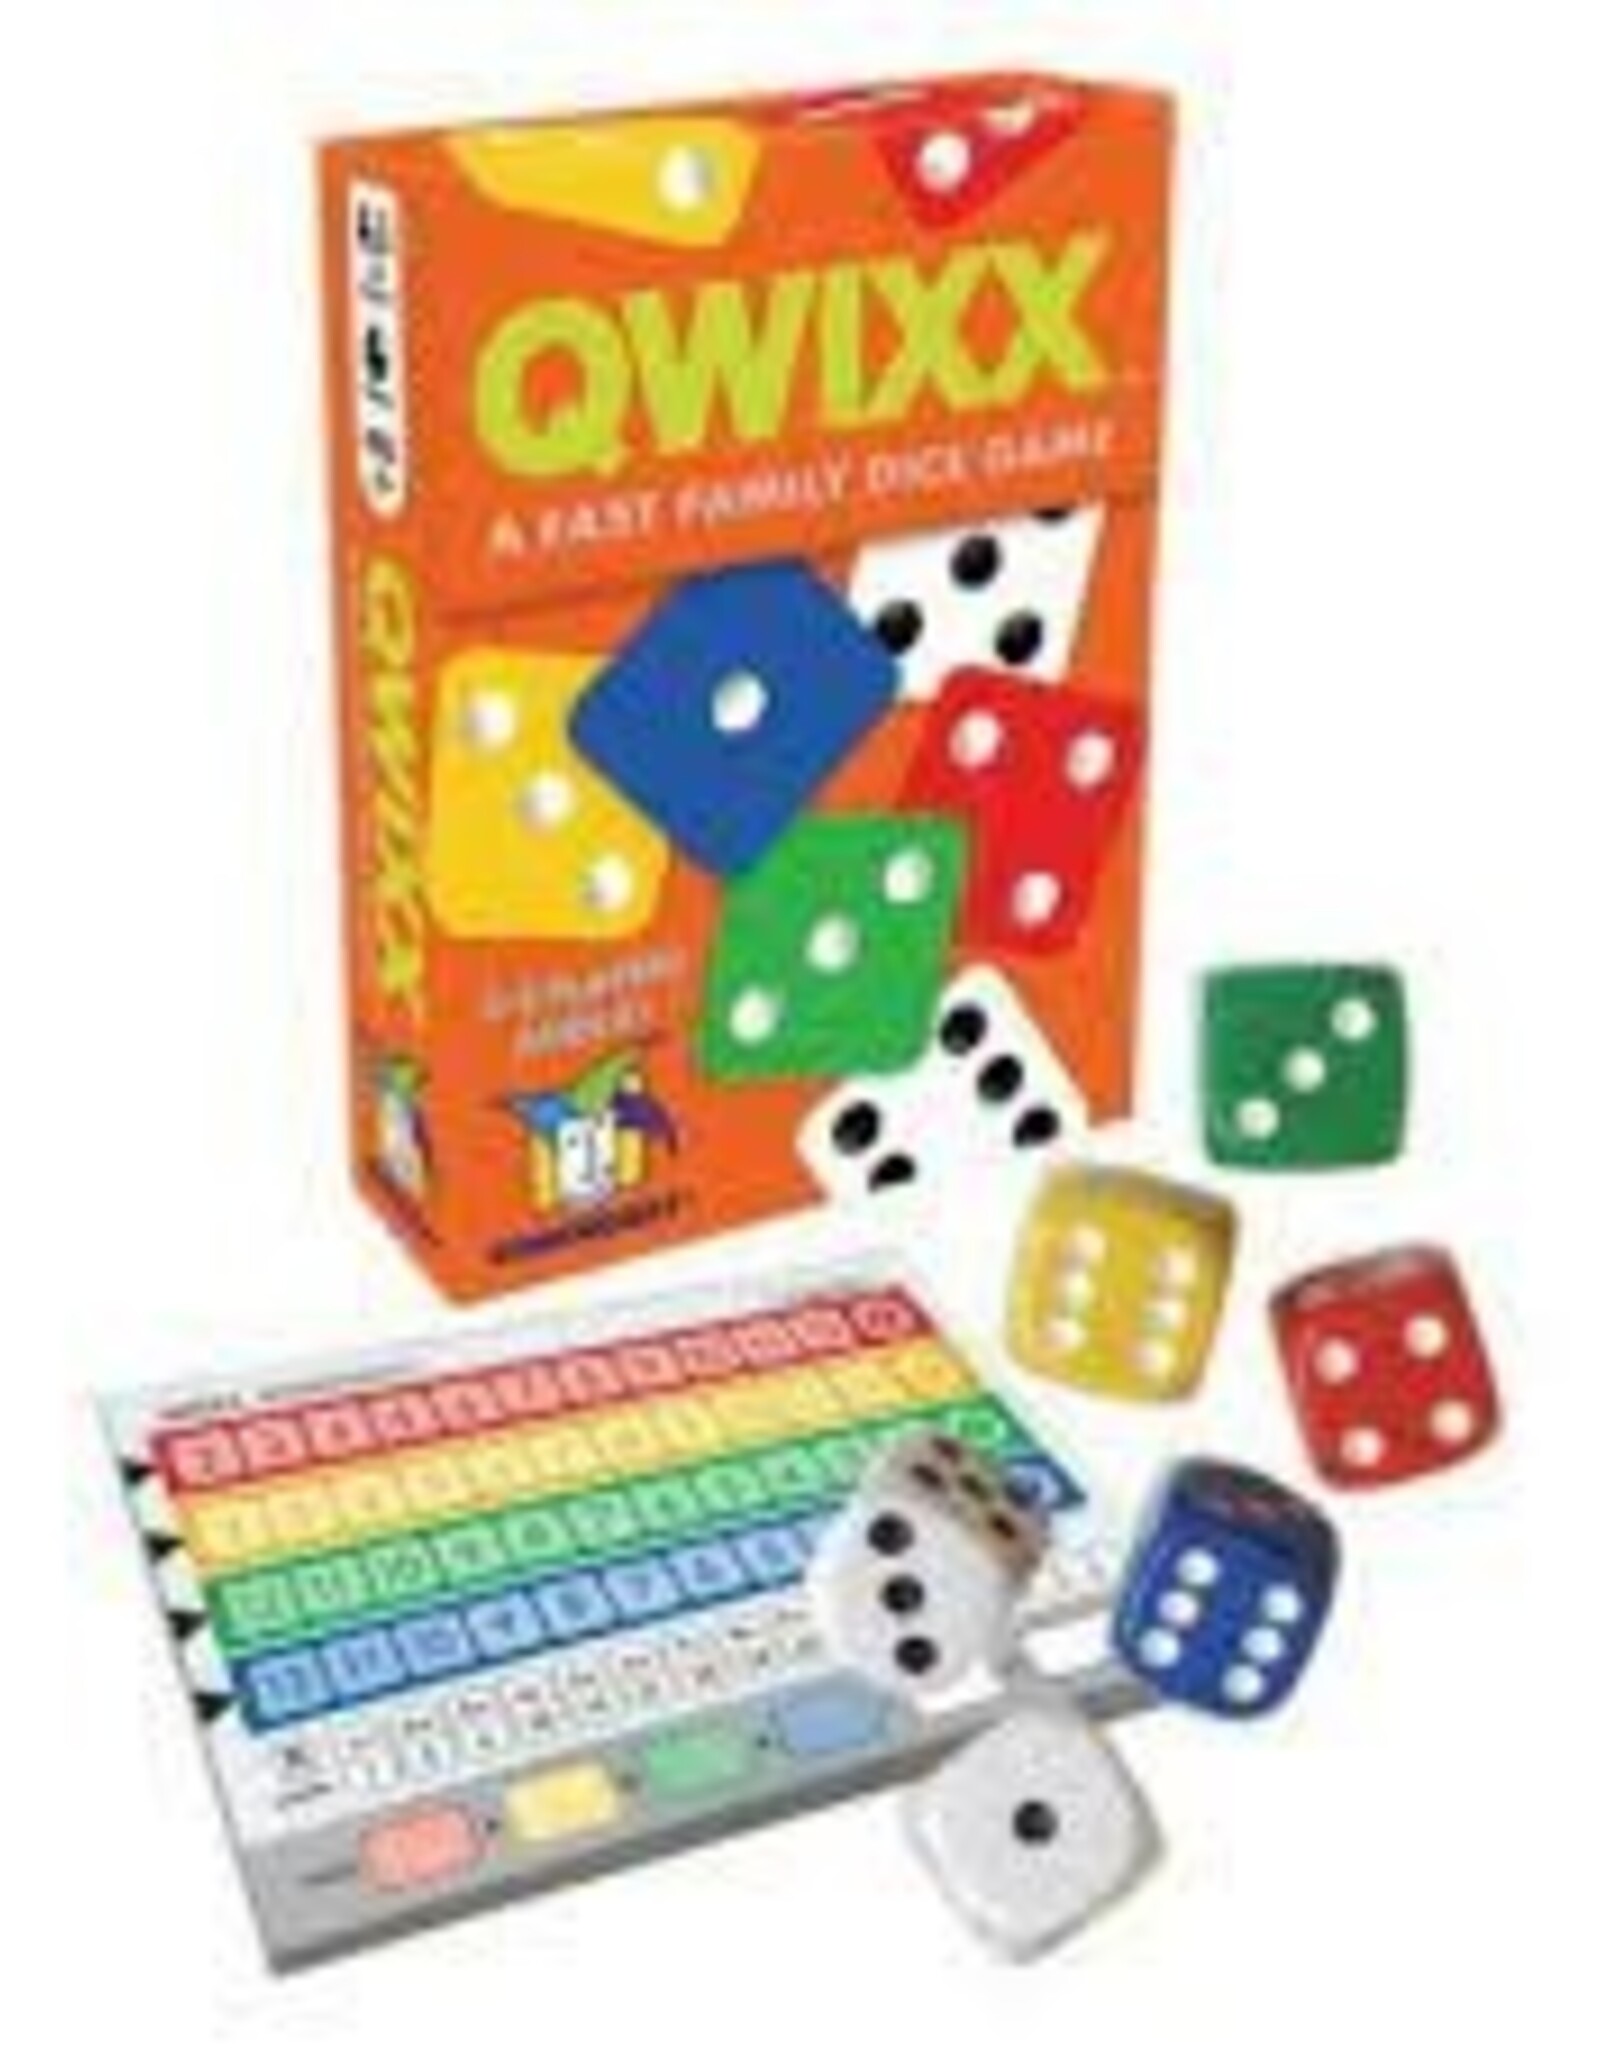 GAMEWRIGHT QWIXX SCORE PADS